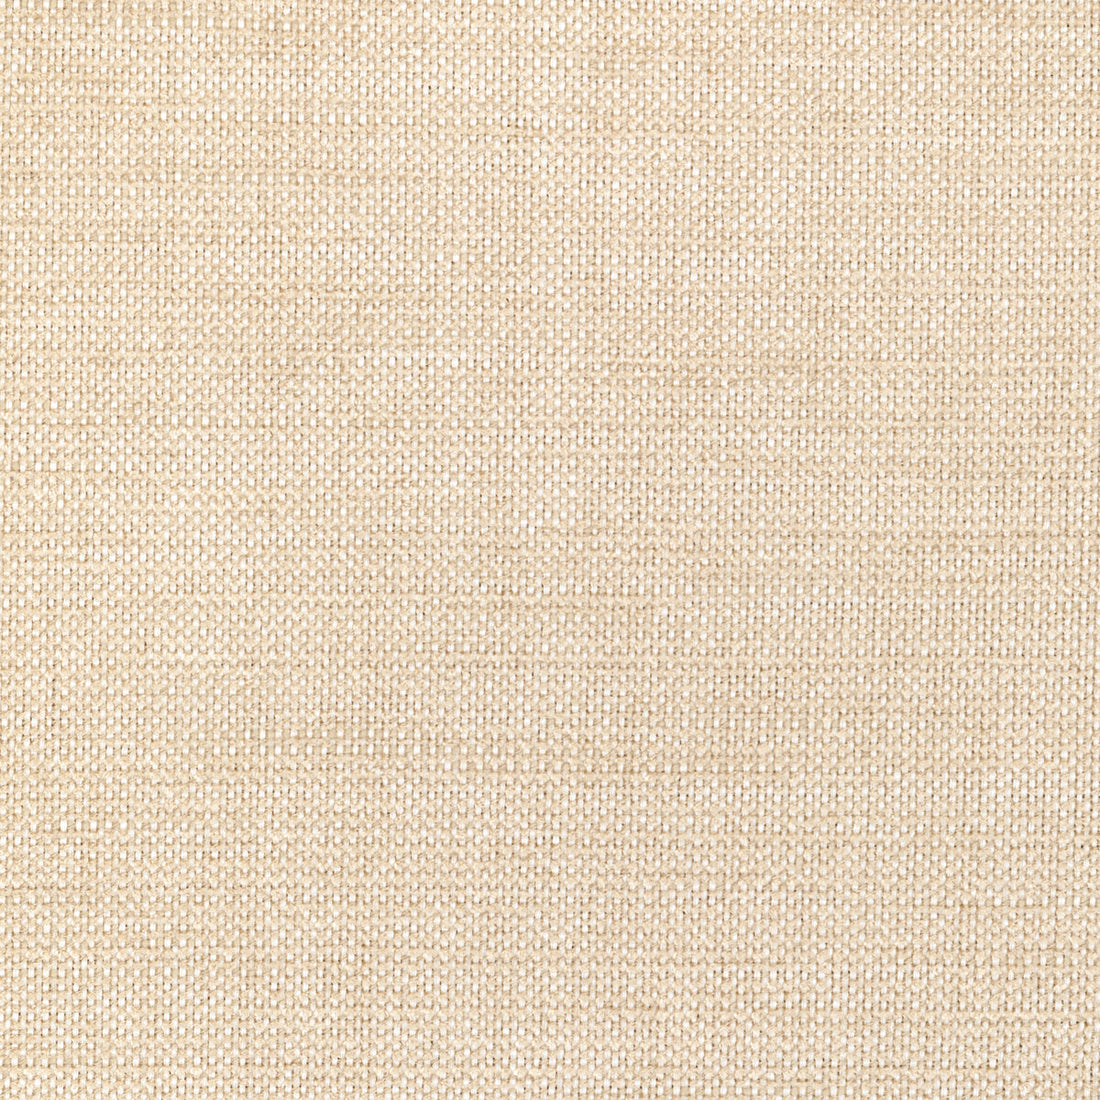 Kravet Smart fabric in 36302-1 color - pattern 36302.1.0 - by Kravet Smart in the Performance Crypton Home collection